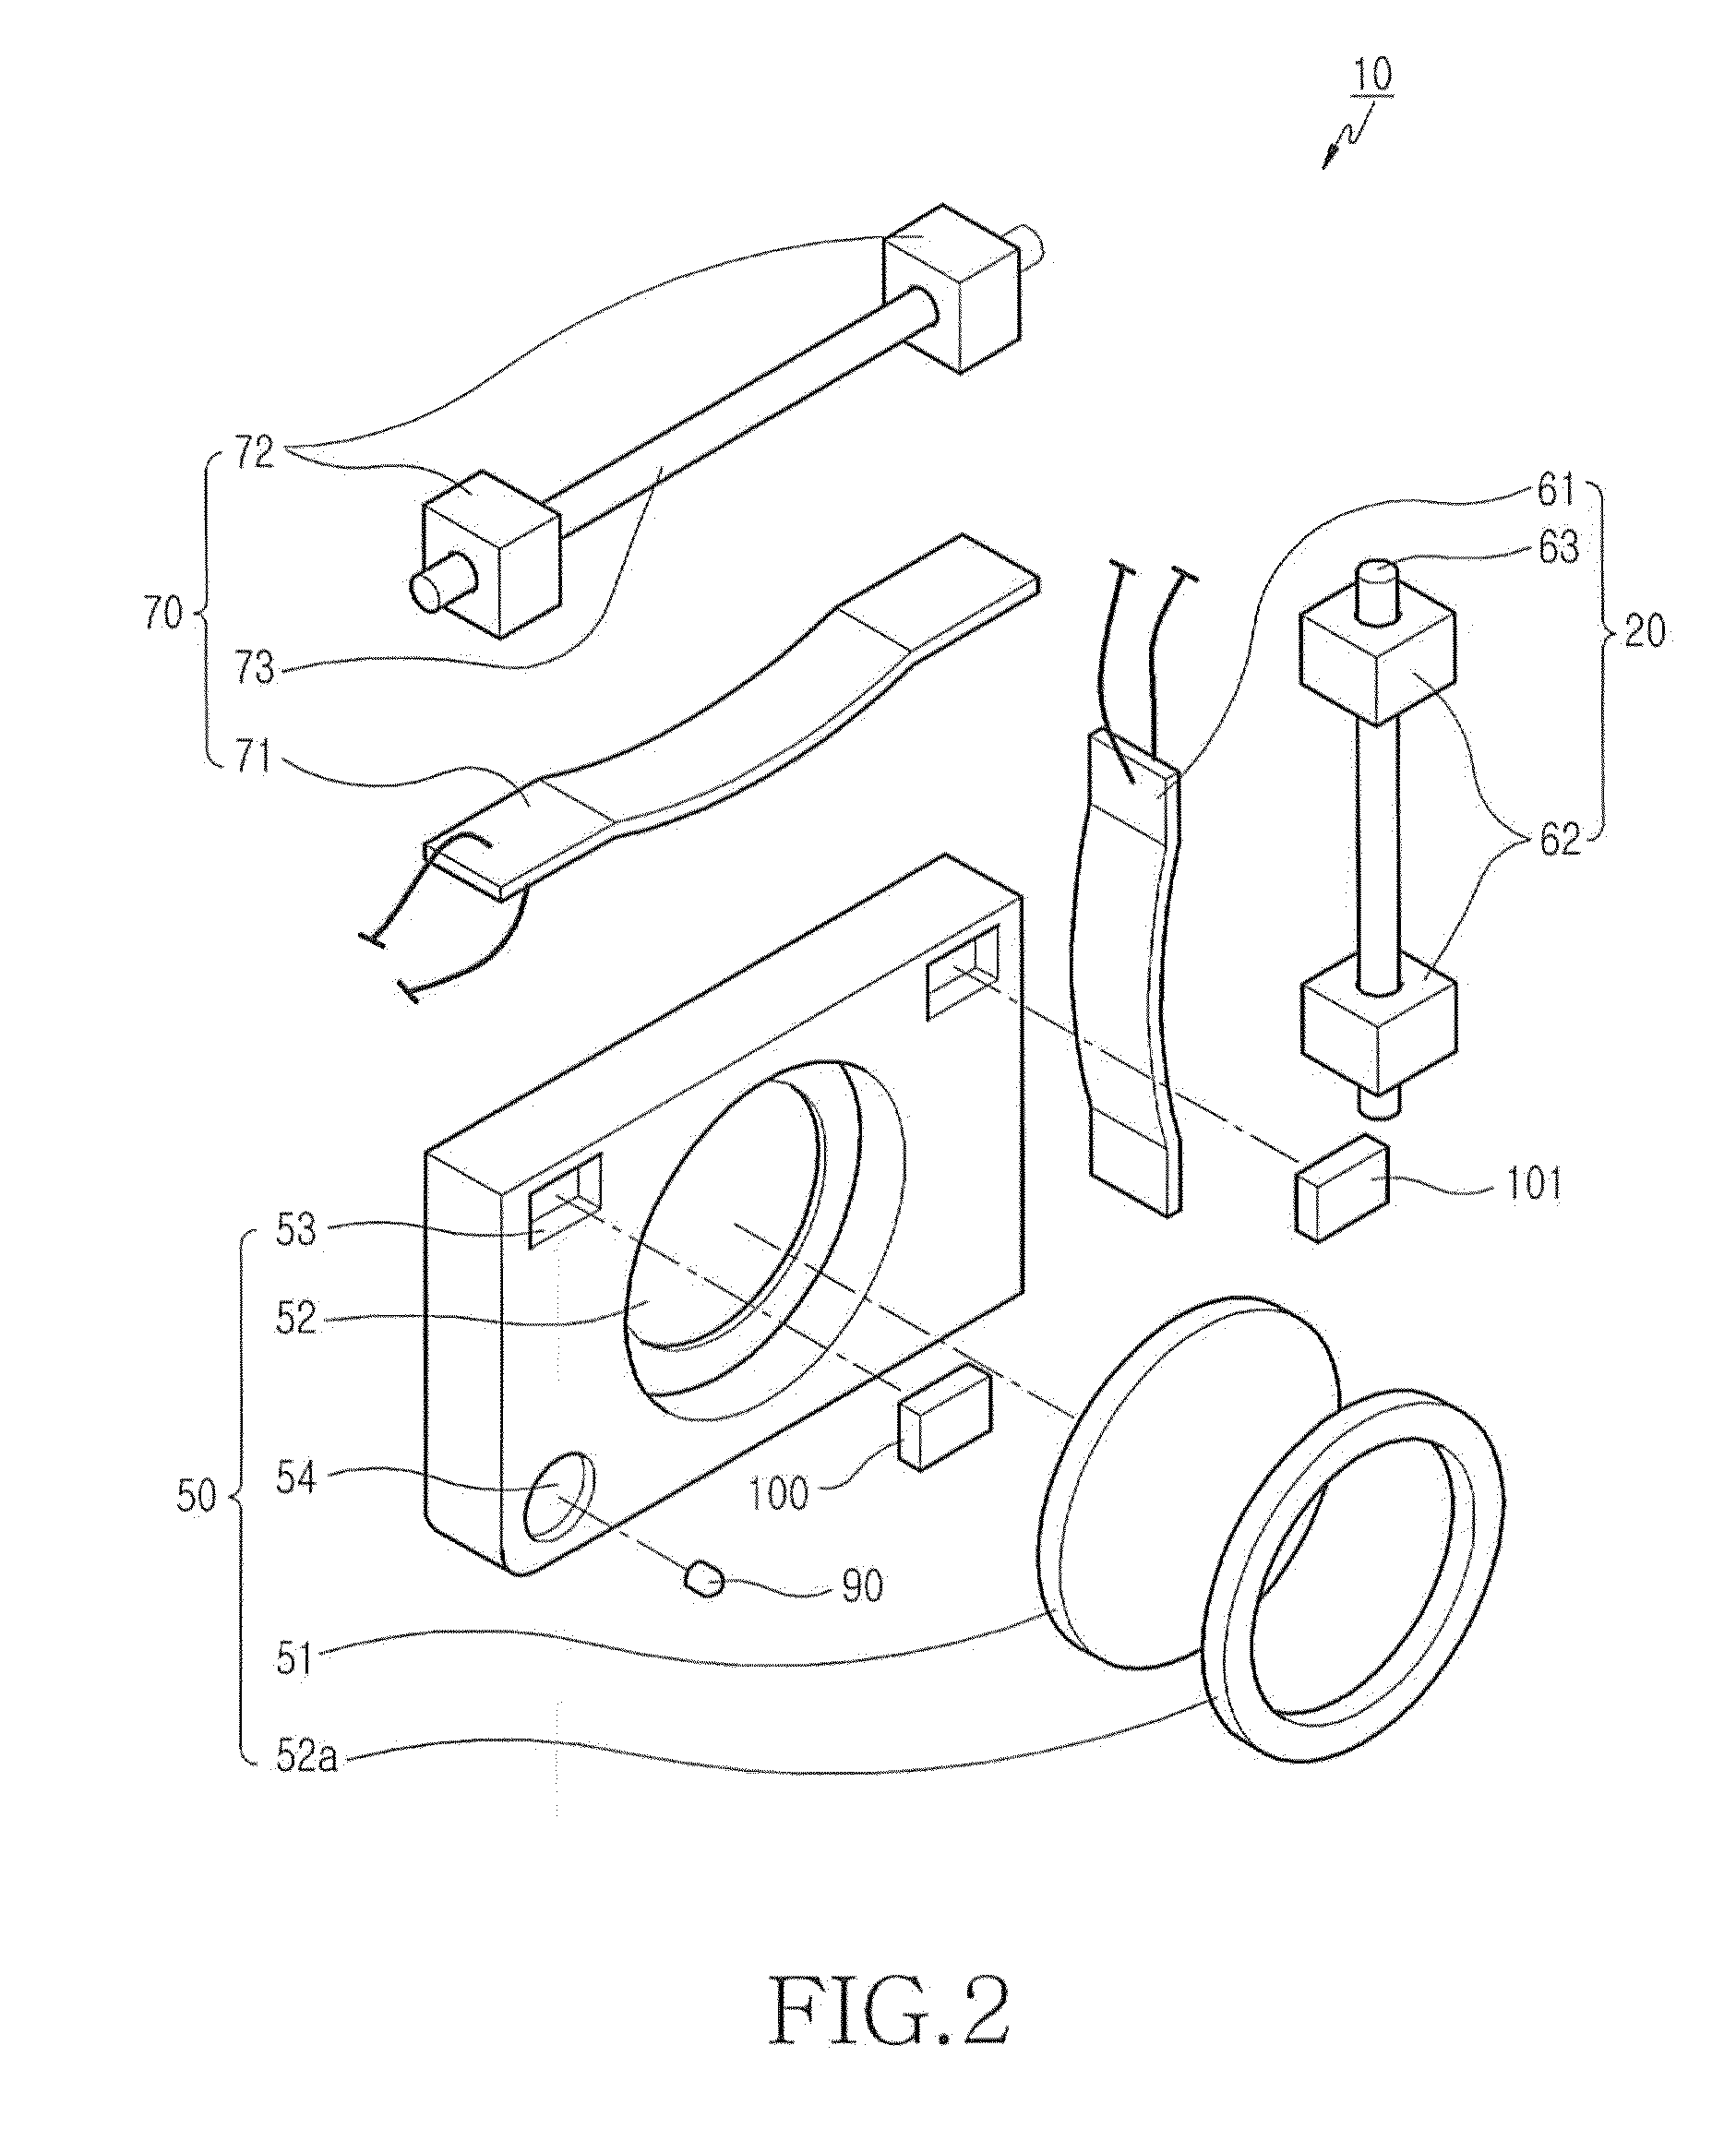 Optical image stabilizer for camera module